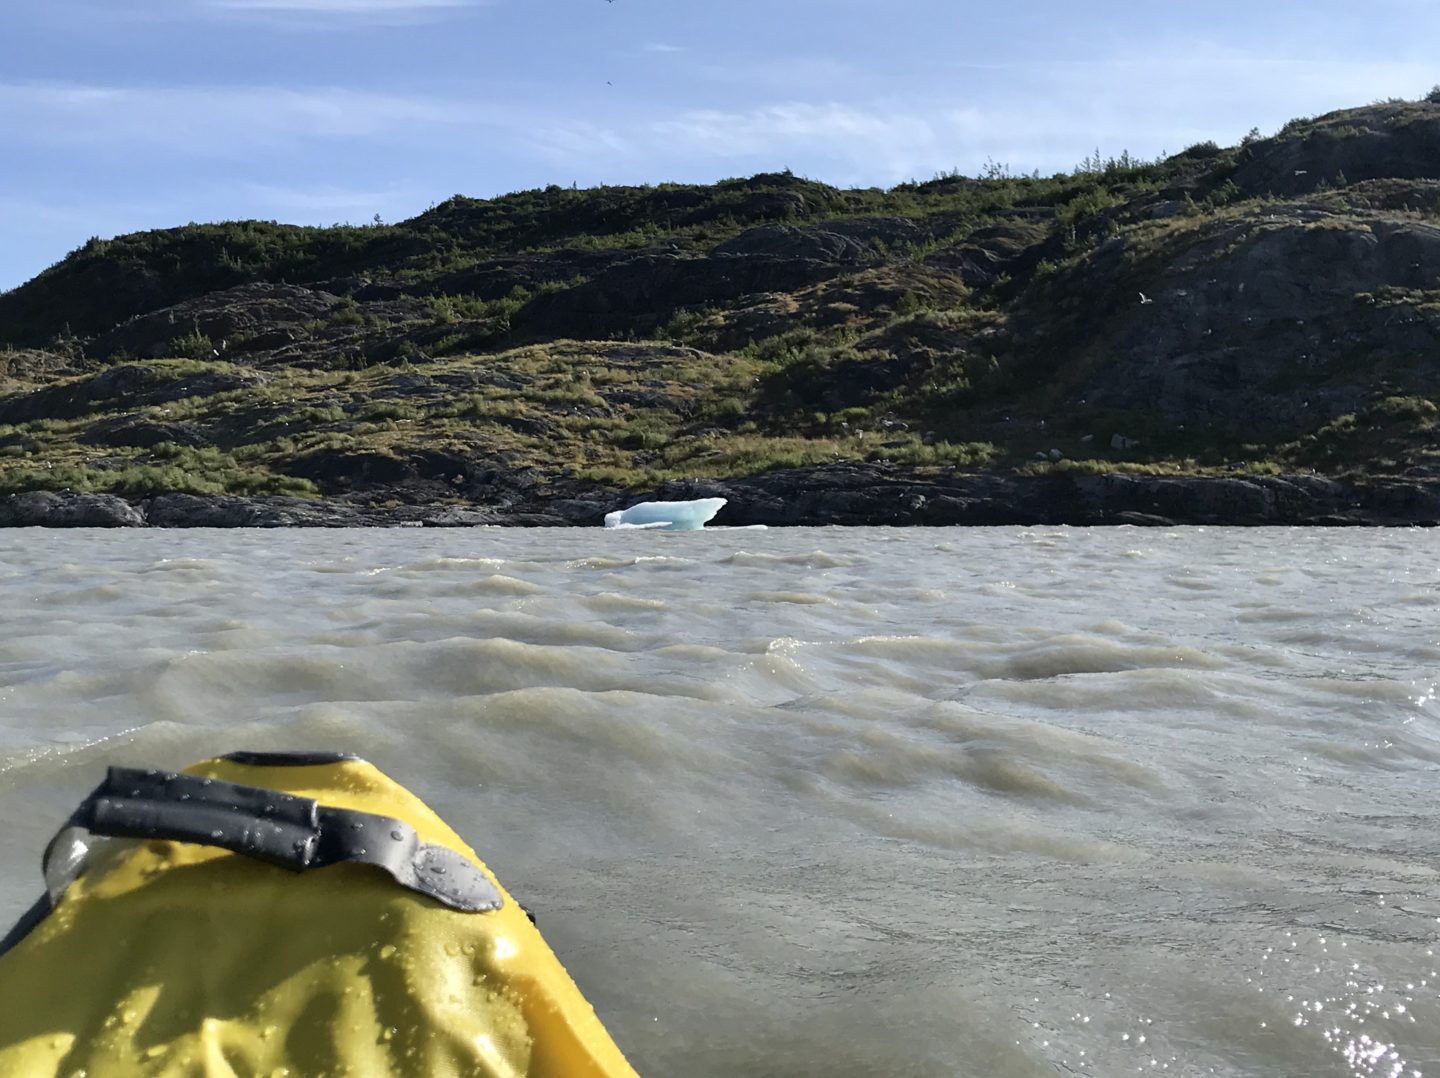 If we stopped paddling for even a few seconds, the current would begin to turn us away from the glacier. But it was exciting to get closer and closer!